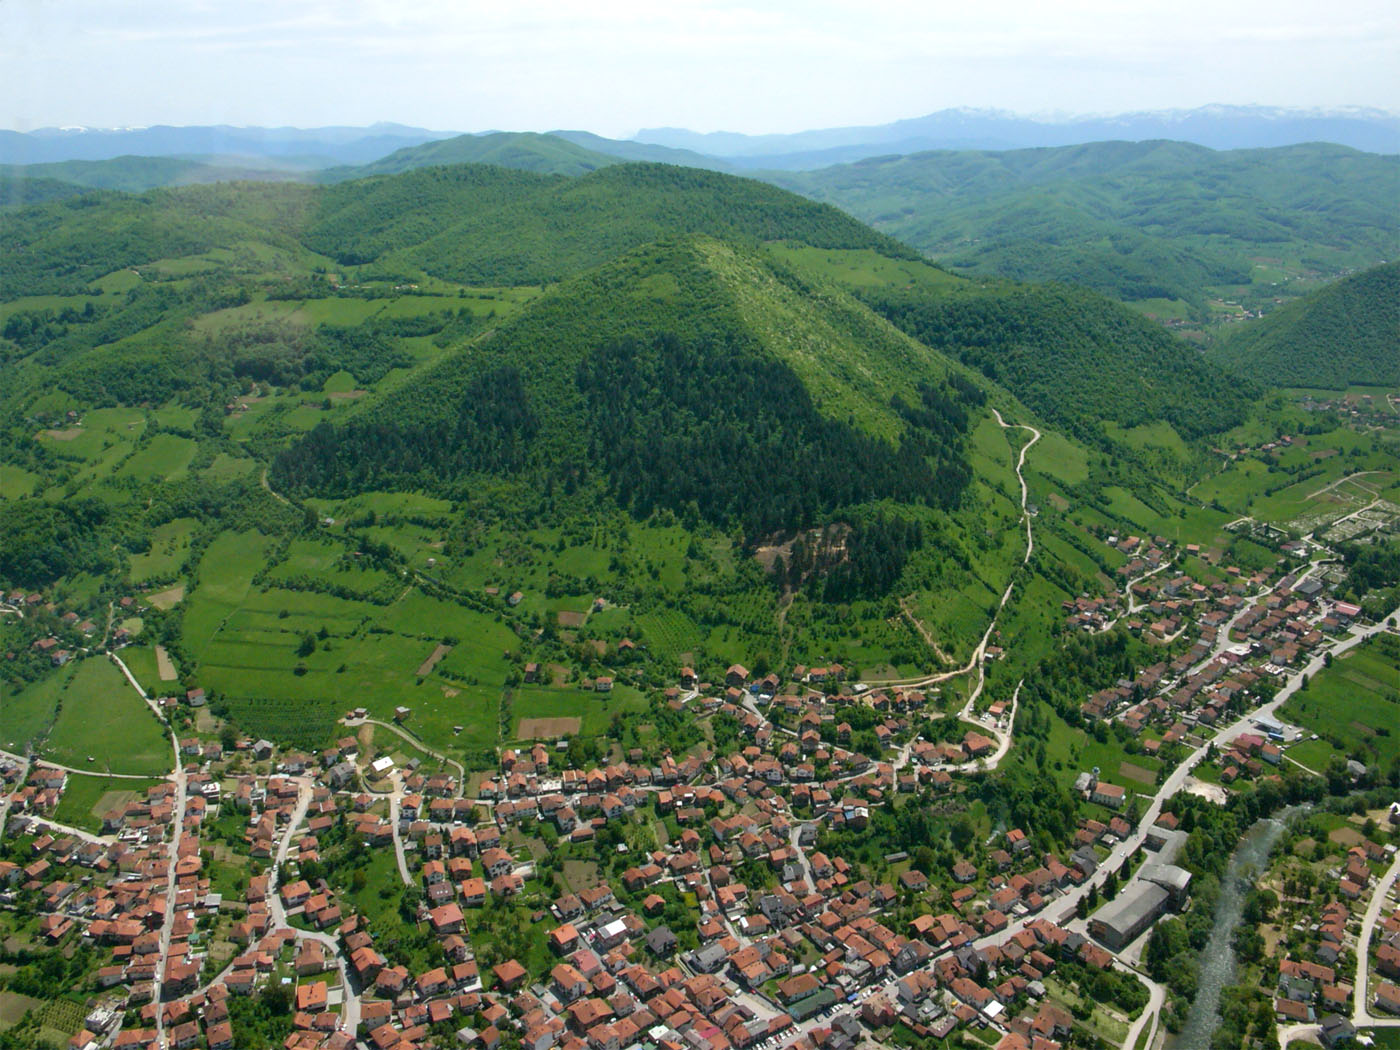 Discovery of New Prehistoric Underground Tunnels at Bosnian Pyramids  Visoko